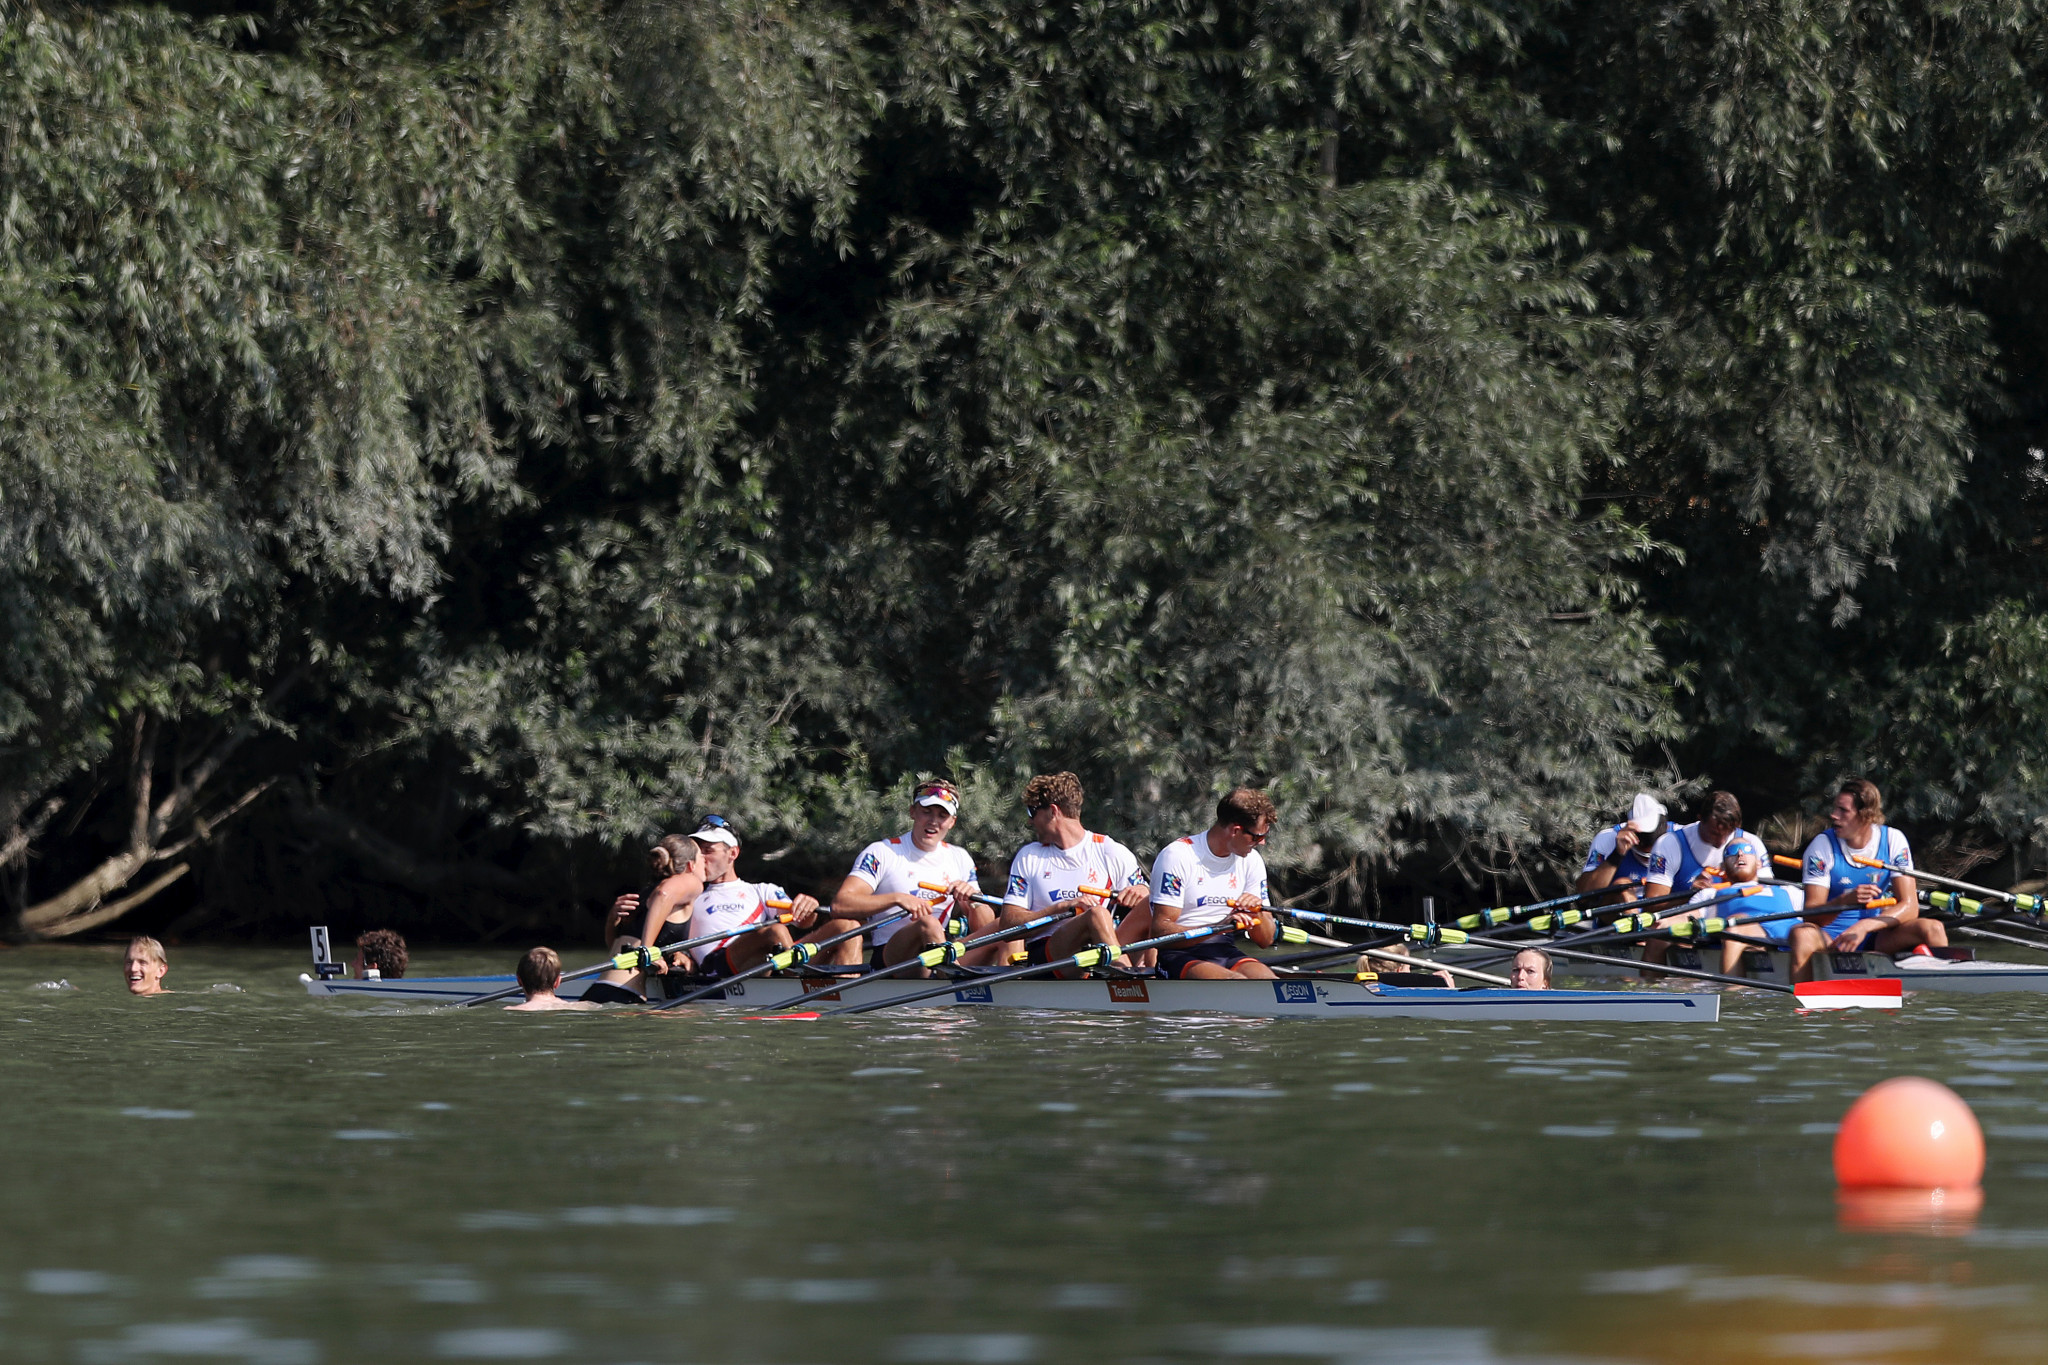 Poland spring surprise with men's four gold at World Rowing Championships